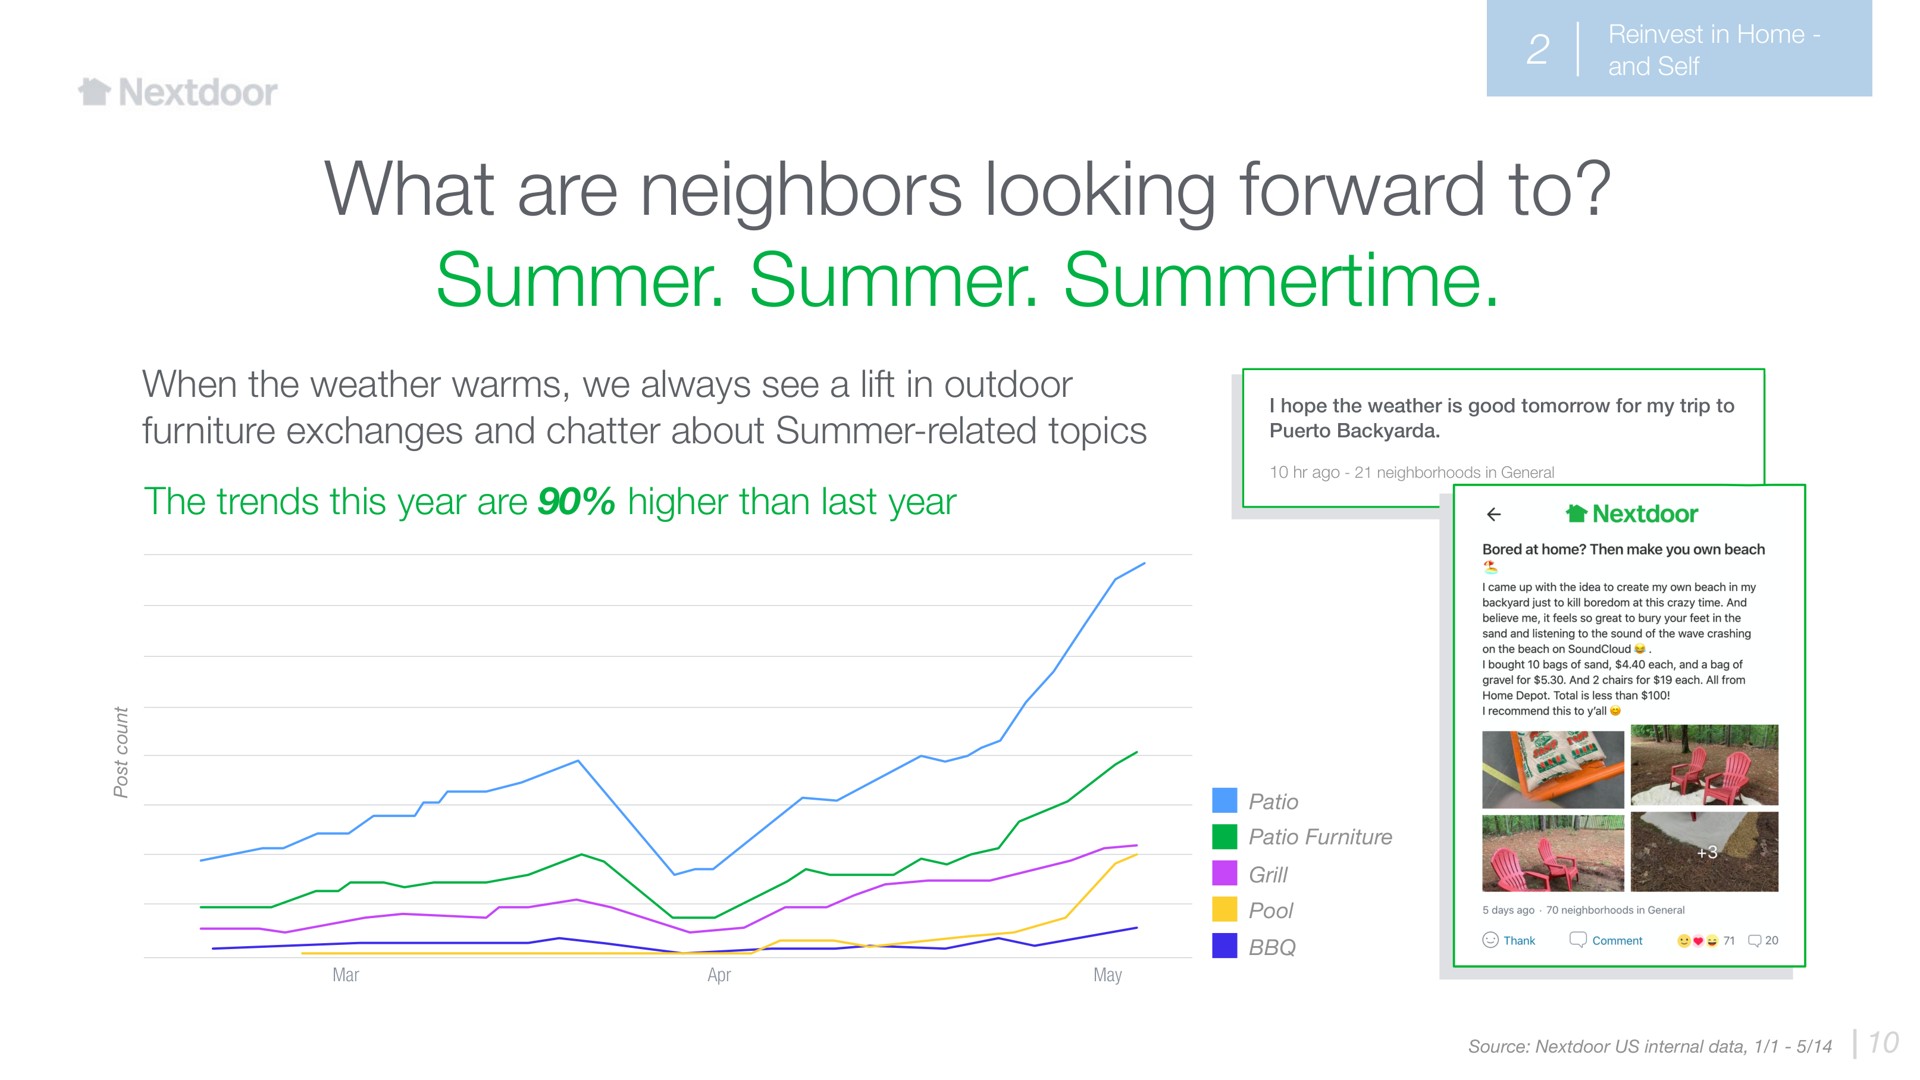 what are neighbors looking forward to summer summer summertime when the weather warms we always see a lift in outdoor furniture exchanges and chatter about summer related topics the trends this year are higher than last year | Nextdoor